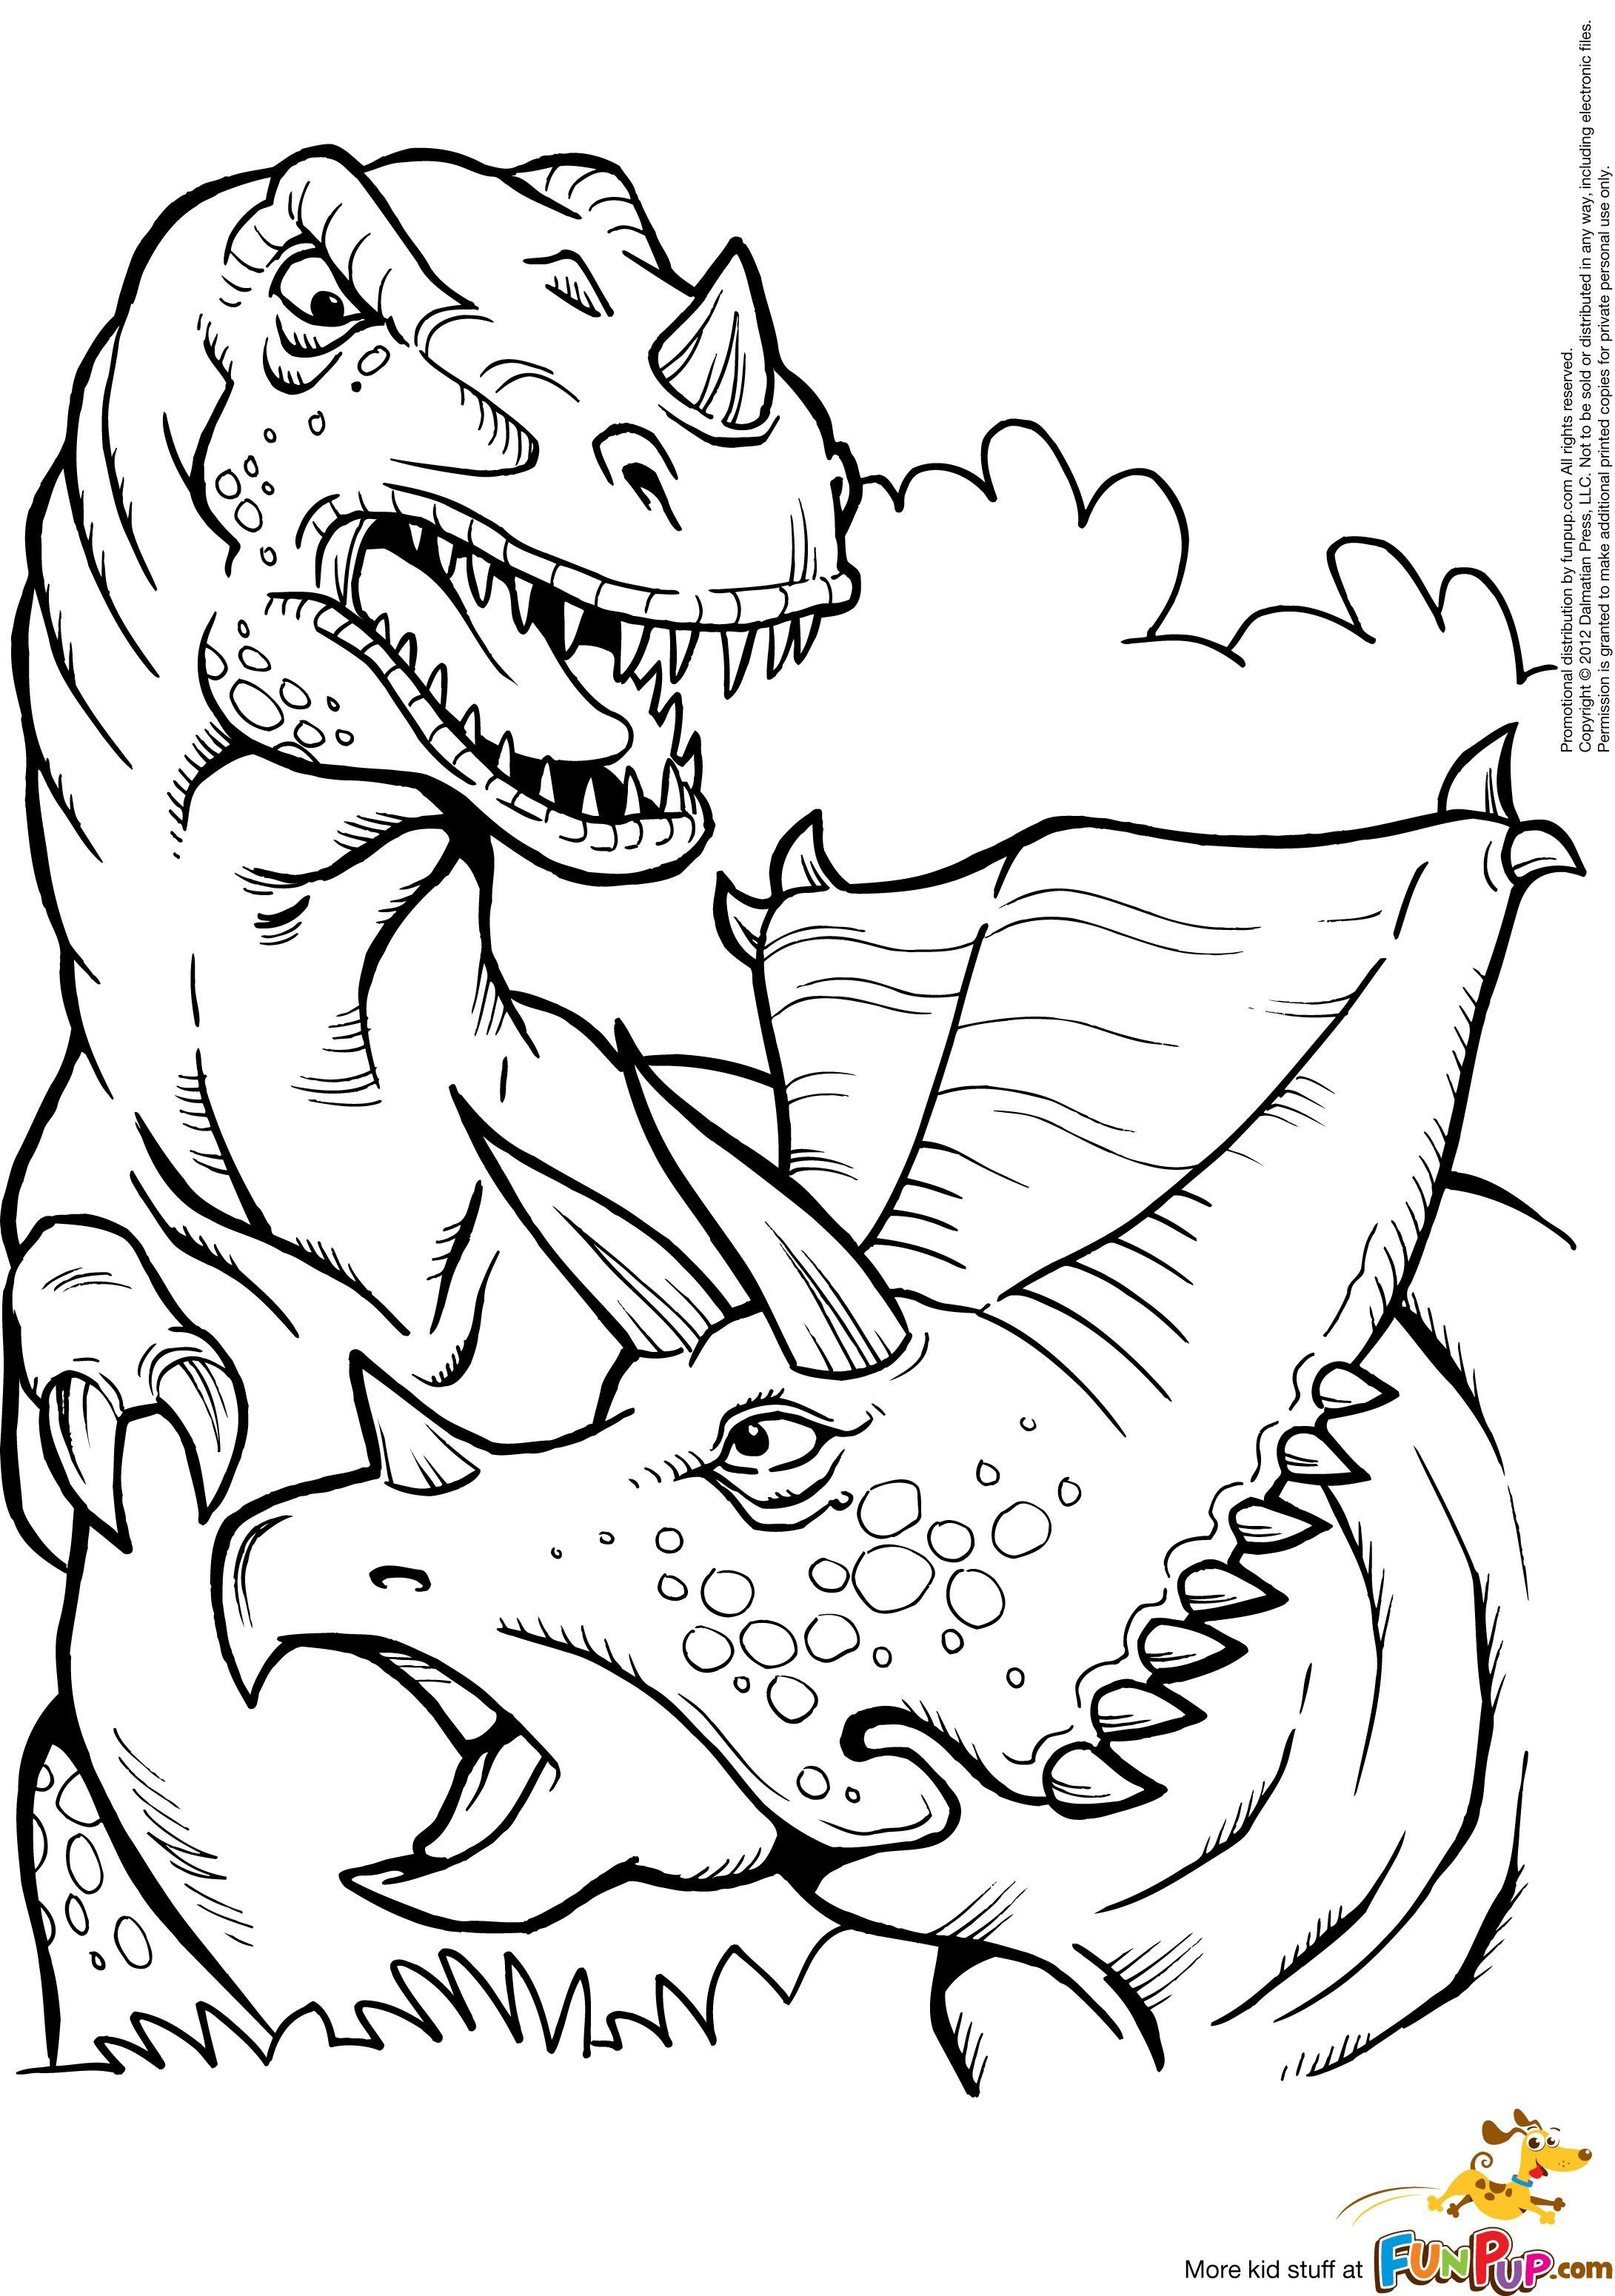 Dinosaurs Online Coloring Pages Wallpaper